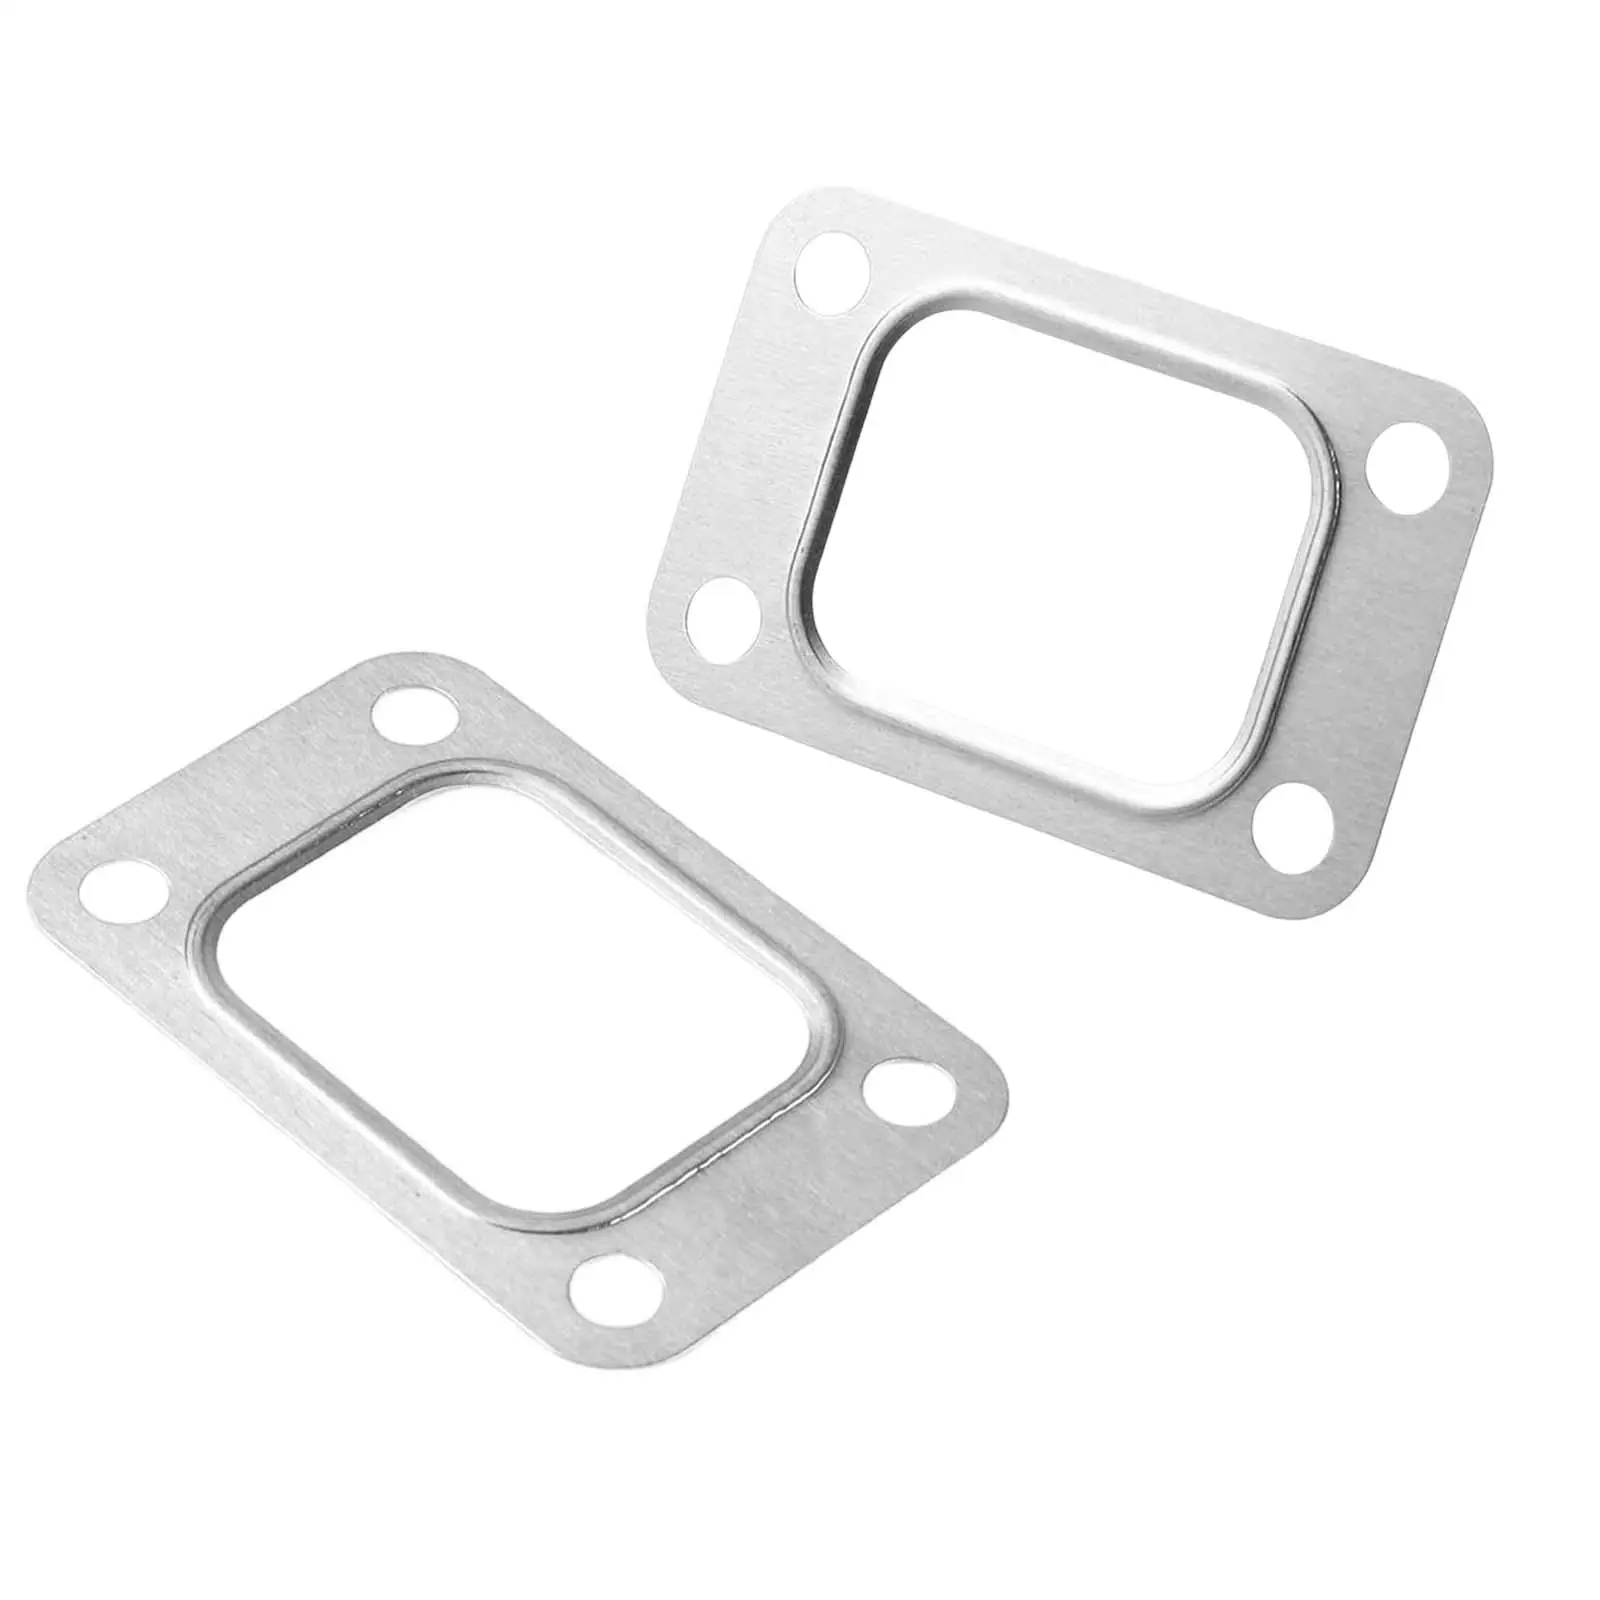 Turbo Inlet Manifold Gasket 4 Bolts Fits for T2 T25 T28 Metal Gaskets Silver